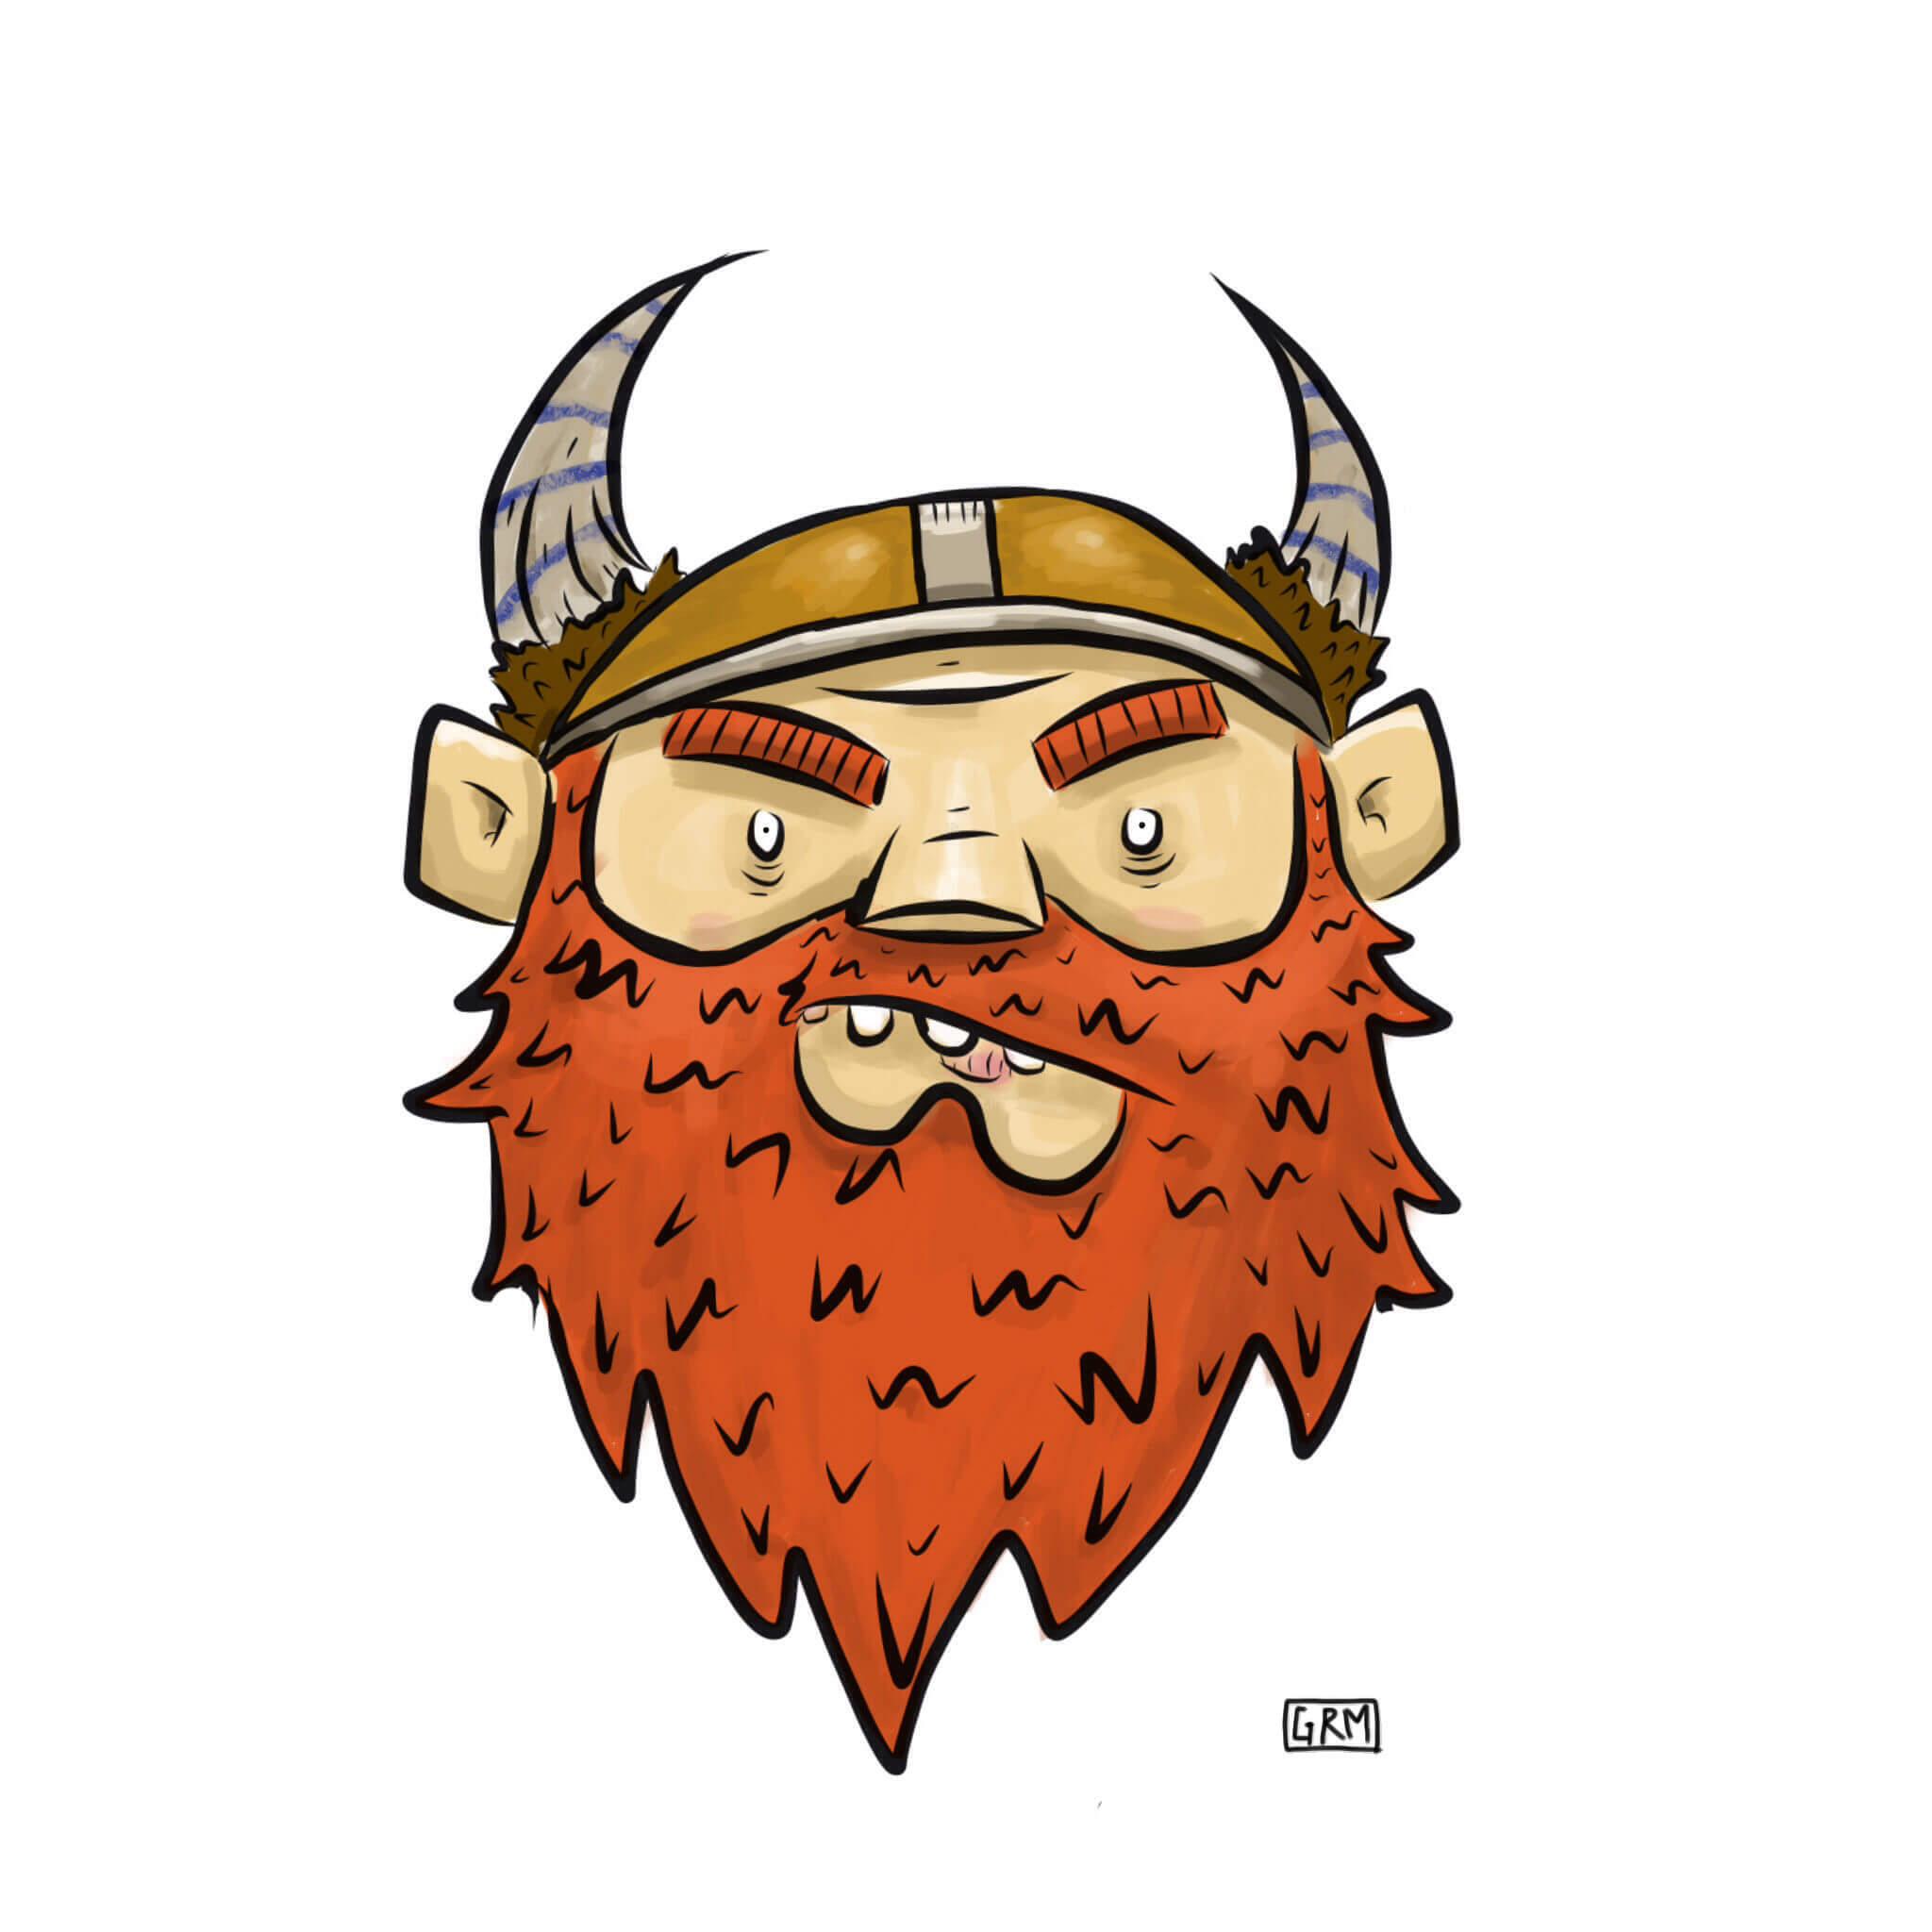 An illustration of a viking.